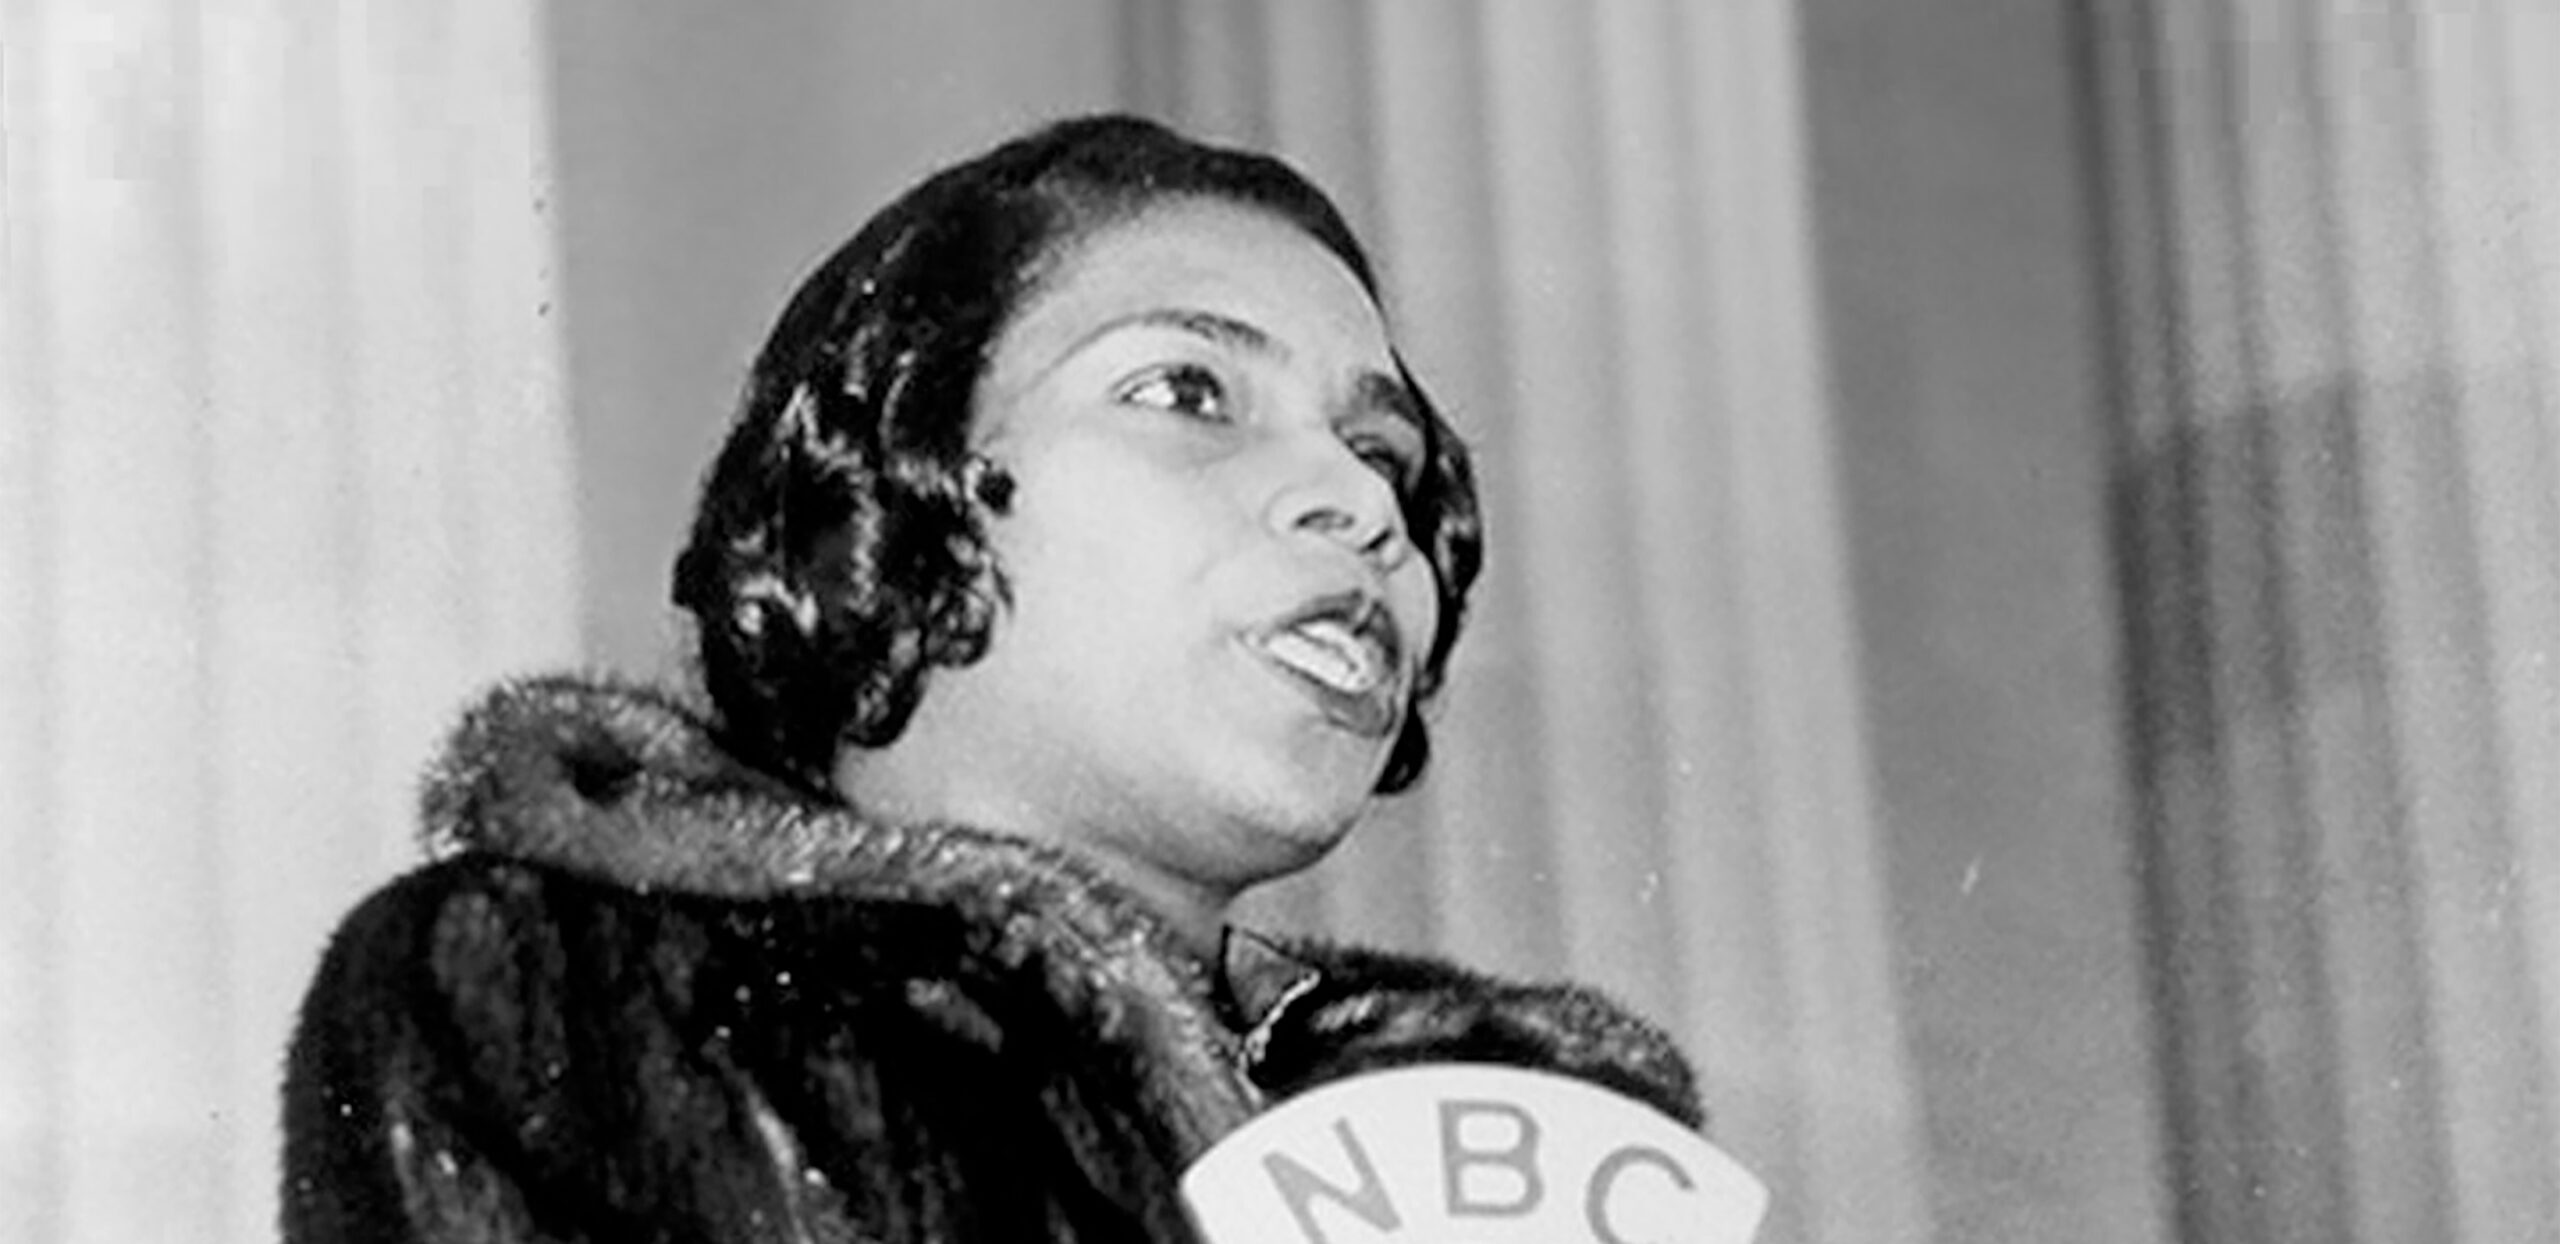 Singer Marian Anderson stands singing behind a podium at the Lincoln Memorial in Washington, D.C.